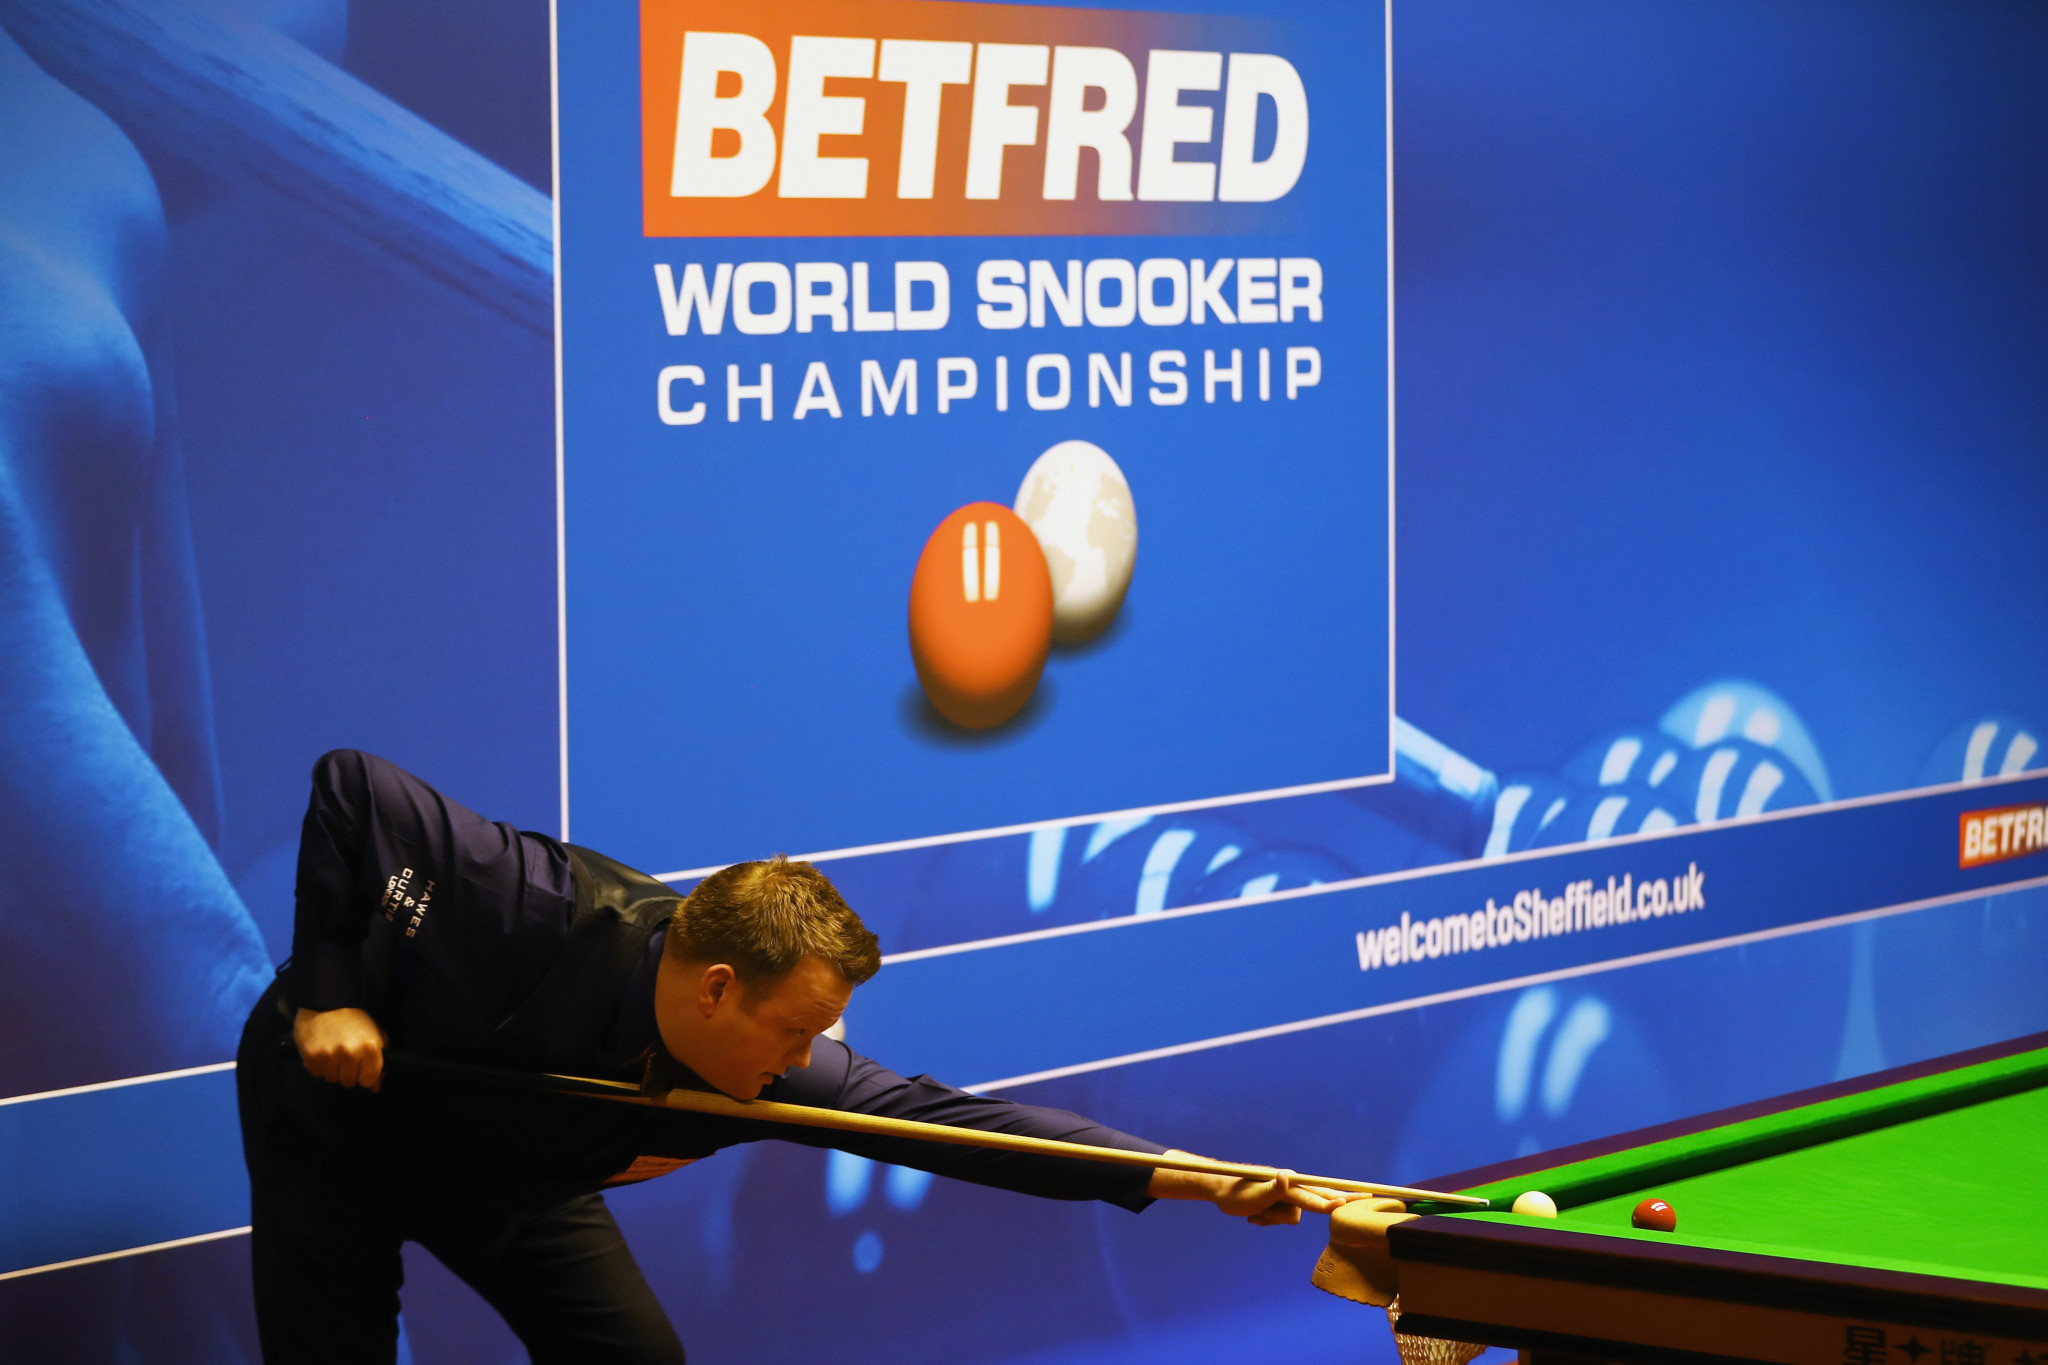 Last year's World Snooker Championship runner-up Shaun Murphy trails Stephen Maguire 6-3 after the opening session of their first-round match ©Getty Images